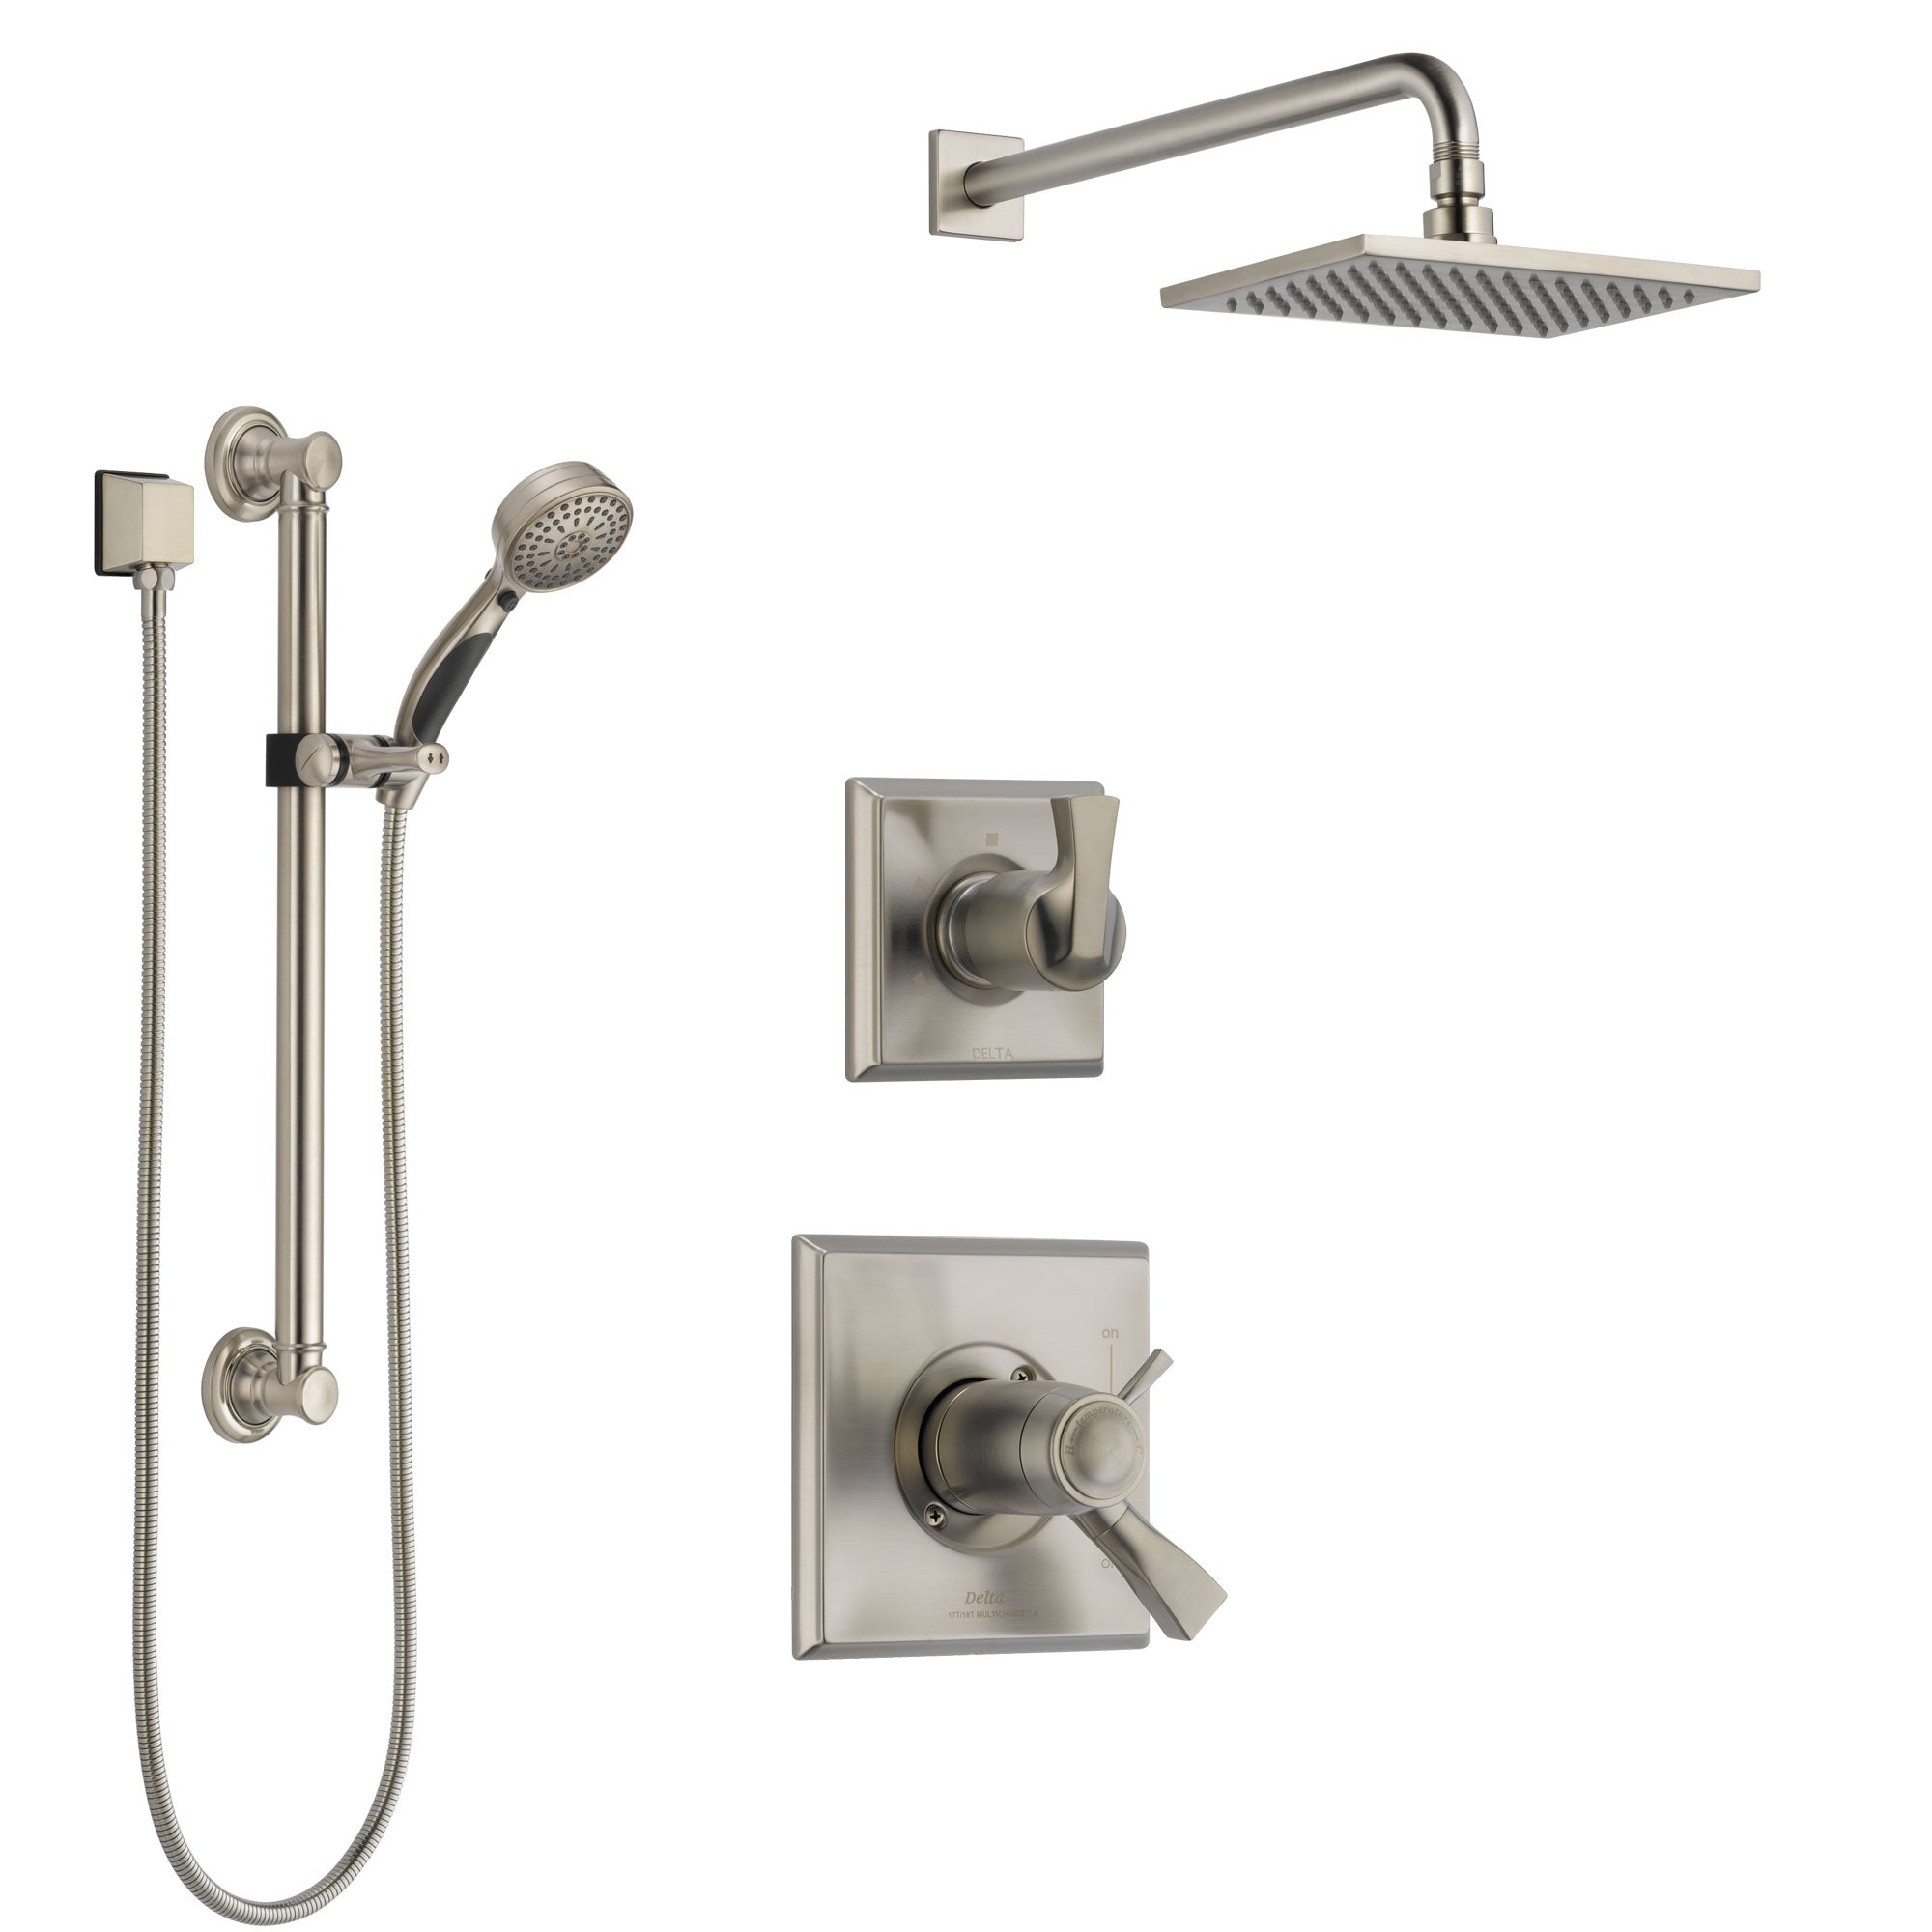 Delta Dryden Dual Thermostatic Control Handle Stainless Steel Finish Shower System, Diverter, Showerhead, and Hand Shower with Grab Bar SS17T511SS1